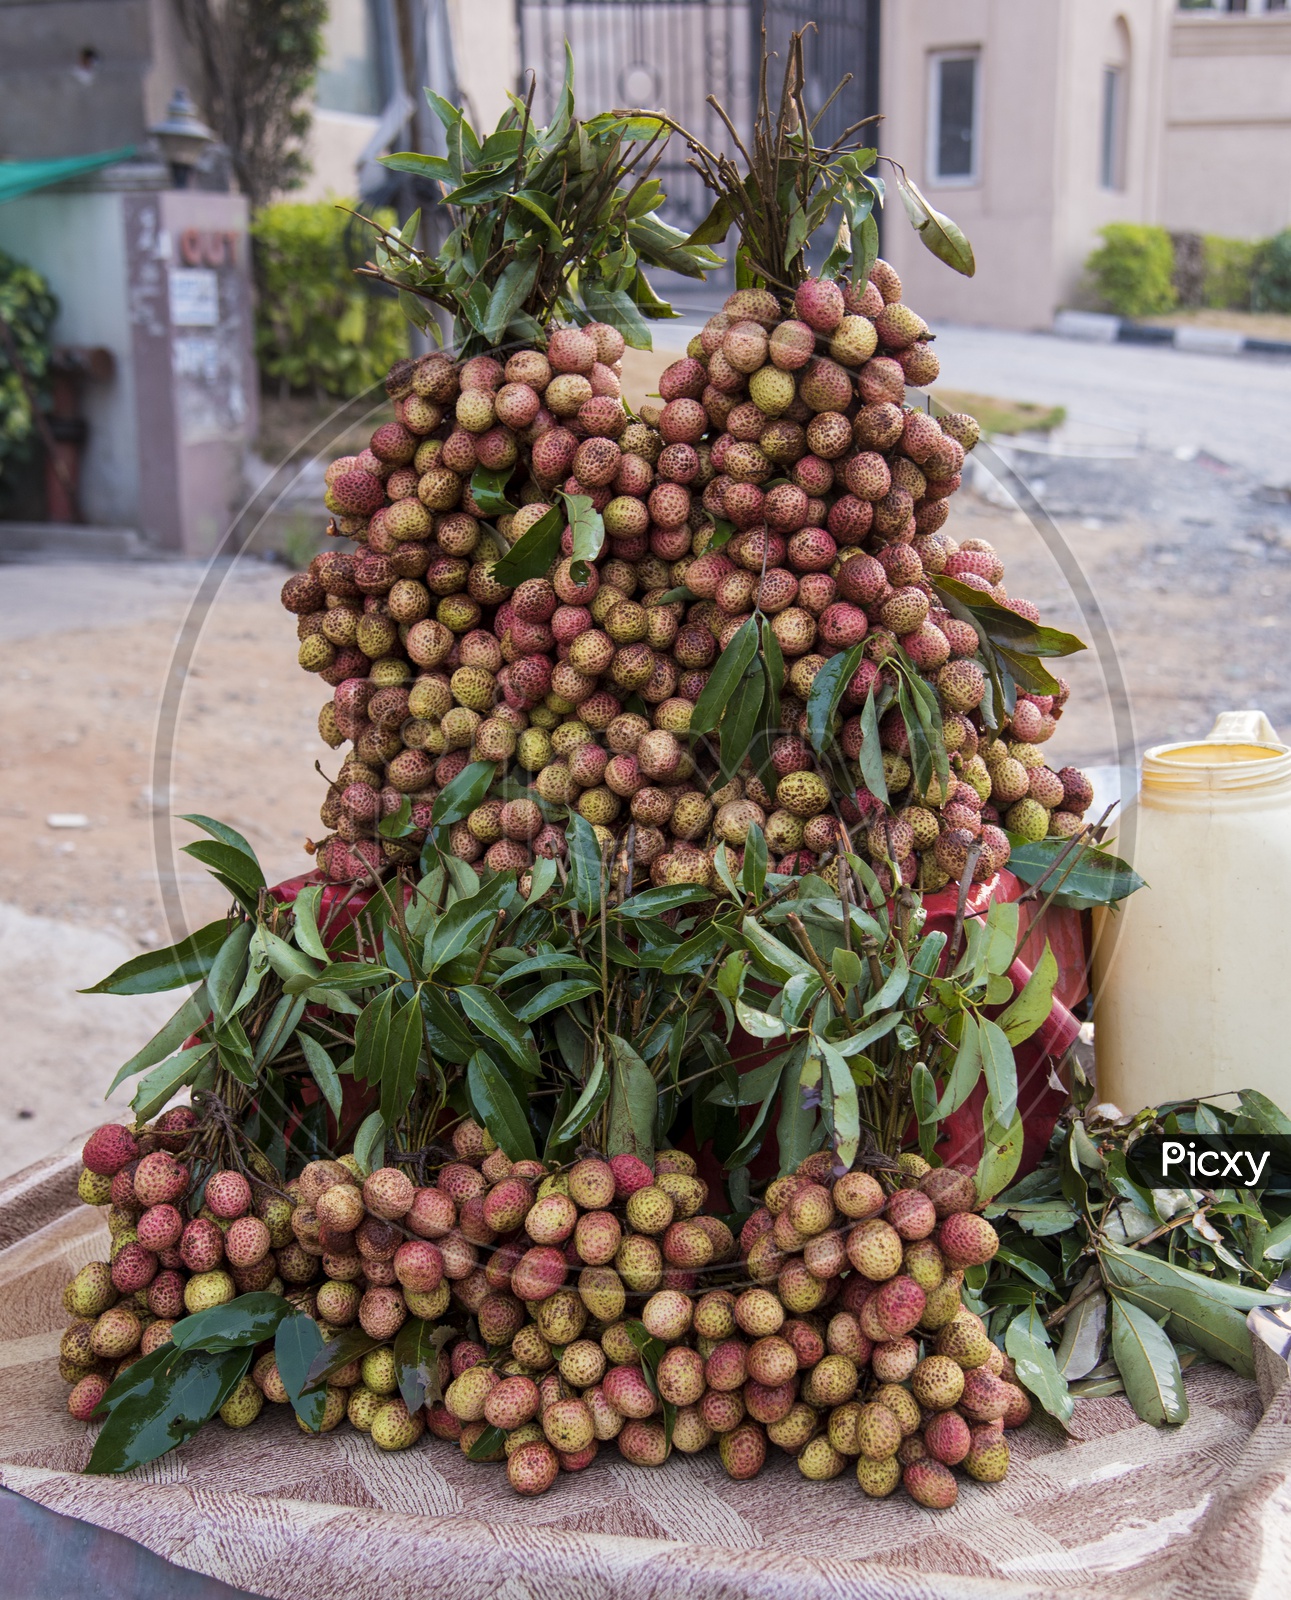 Litchi Fruit for sale in Hyderabad